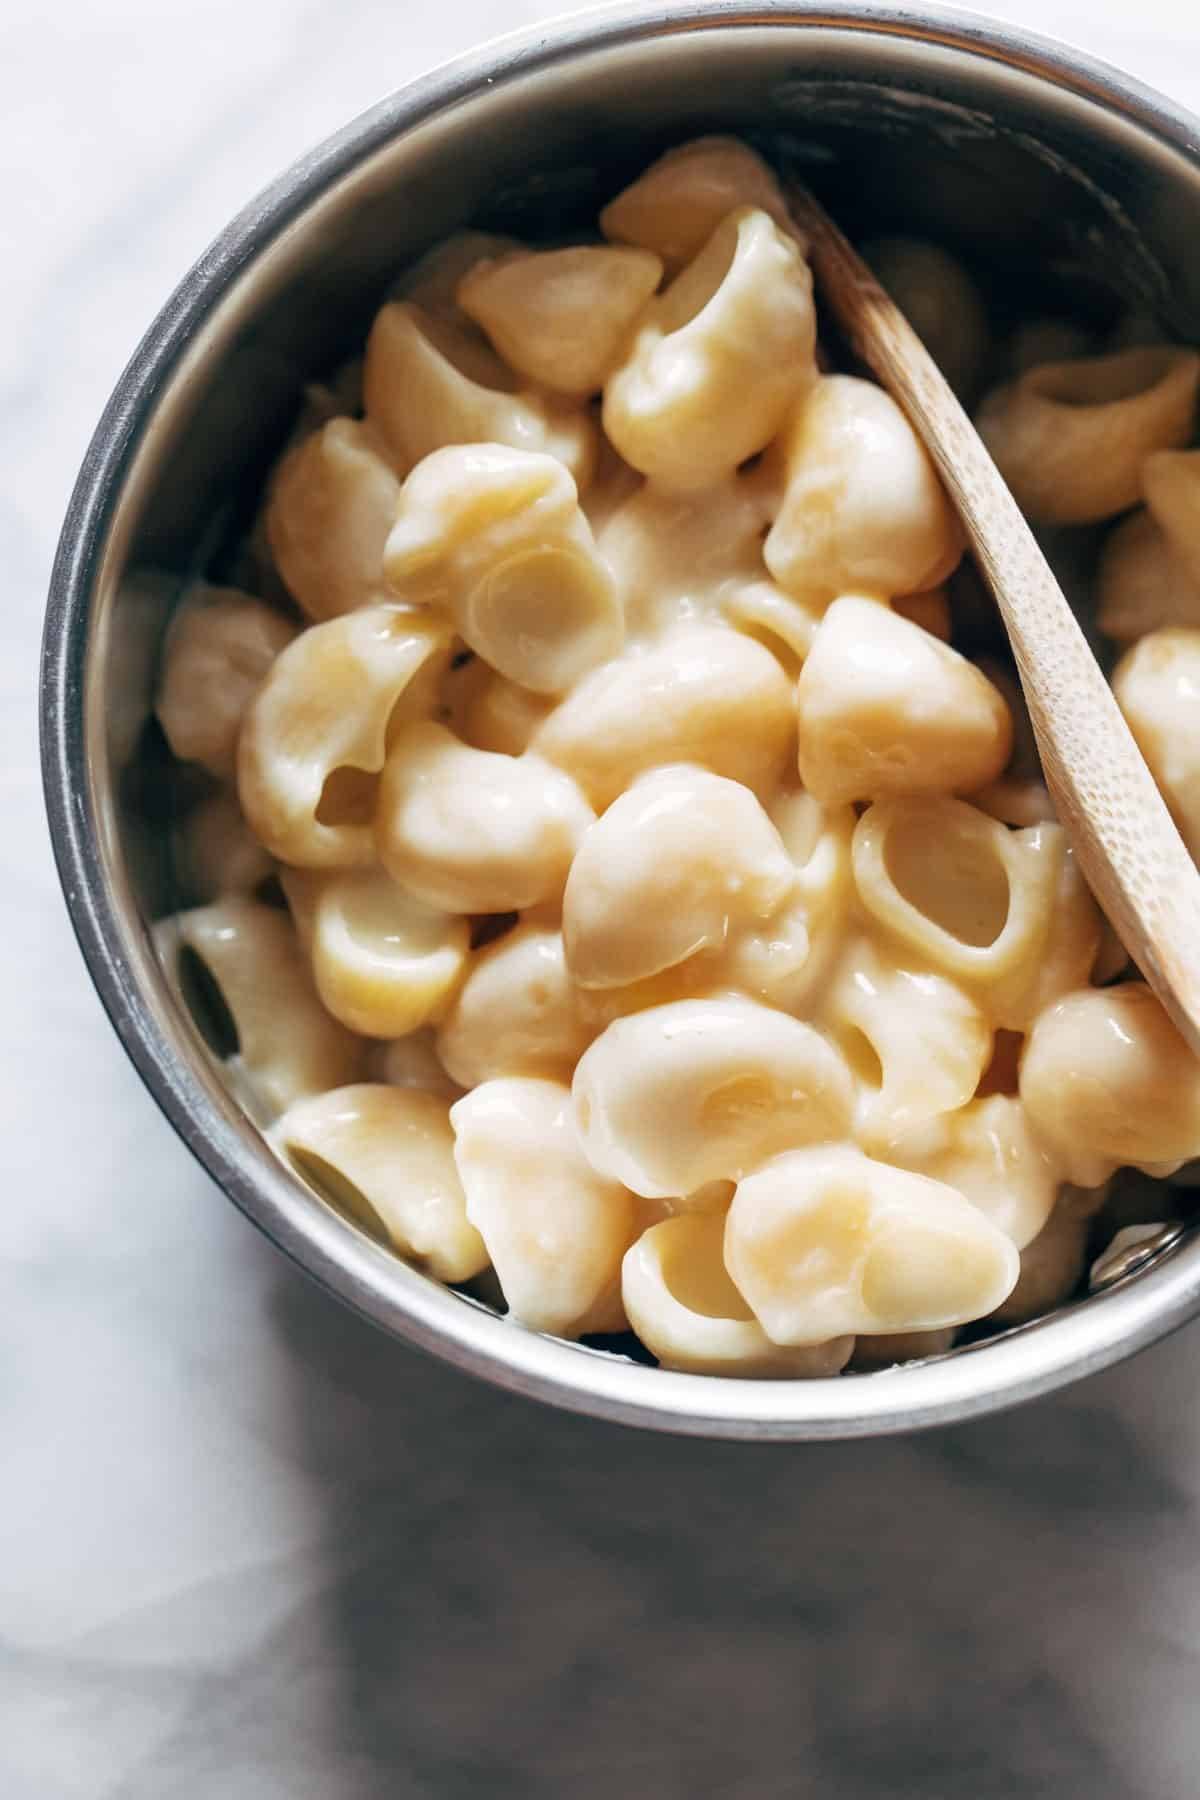 A bowl of shell pasta with wooden spoon.